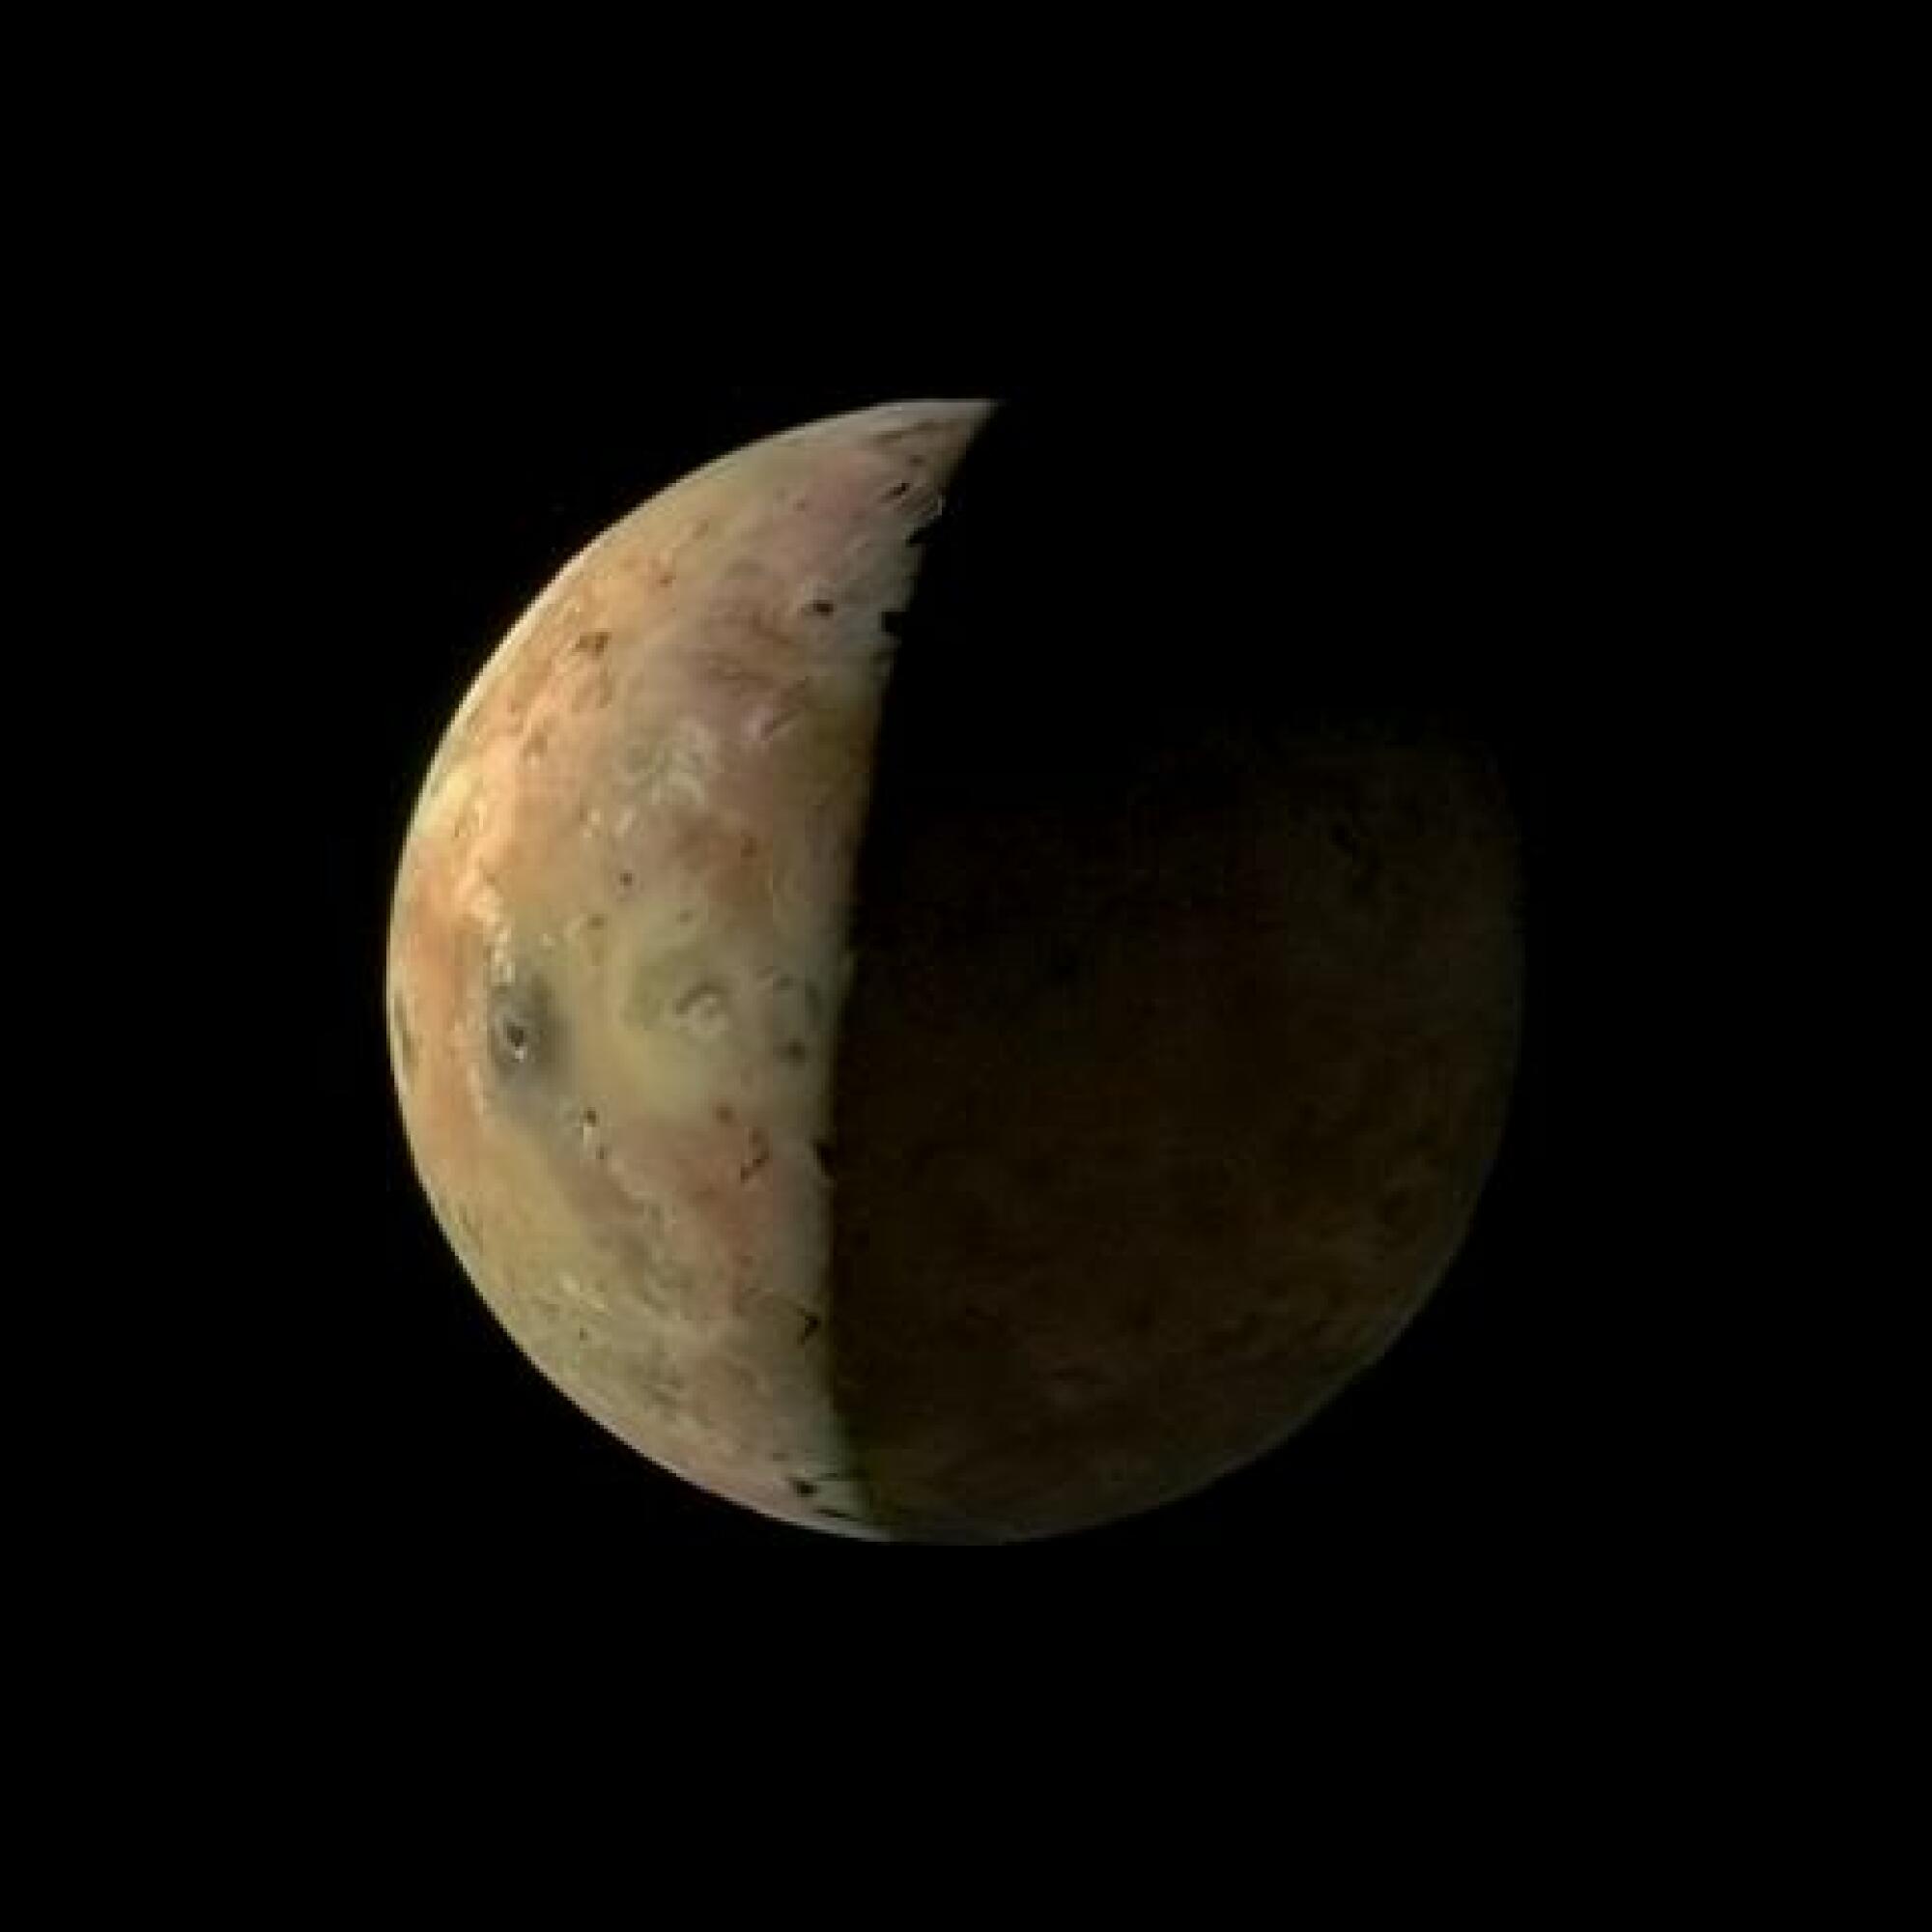 The volcanic moon Io as captured on April 9, 2024.